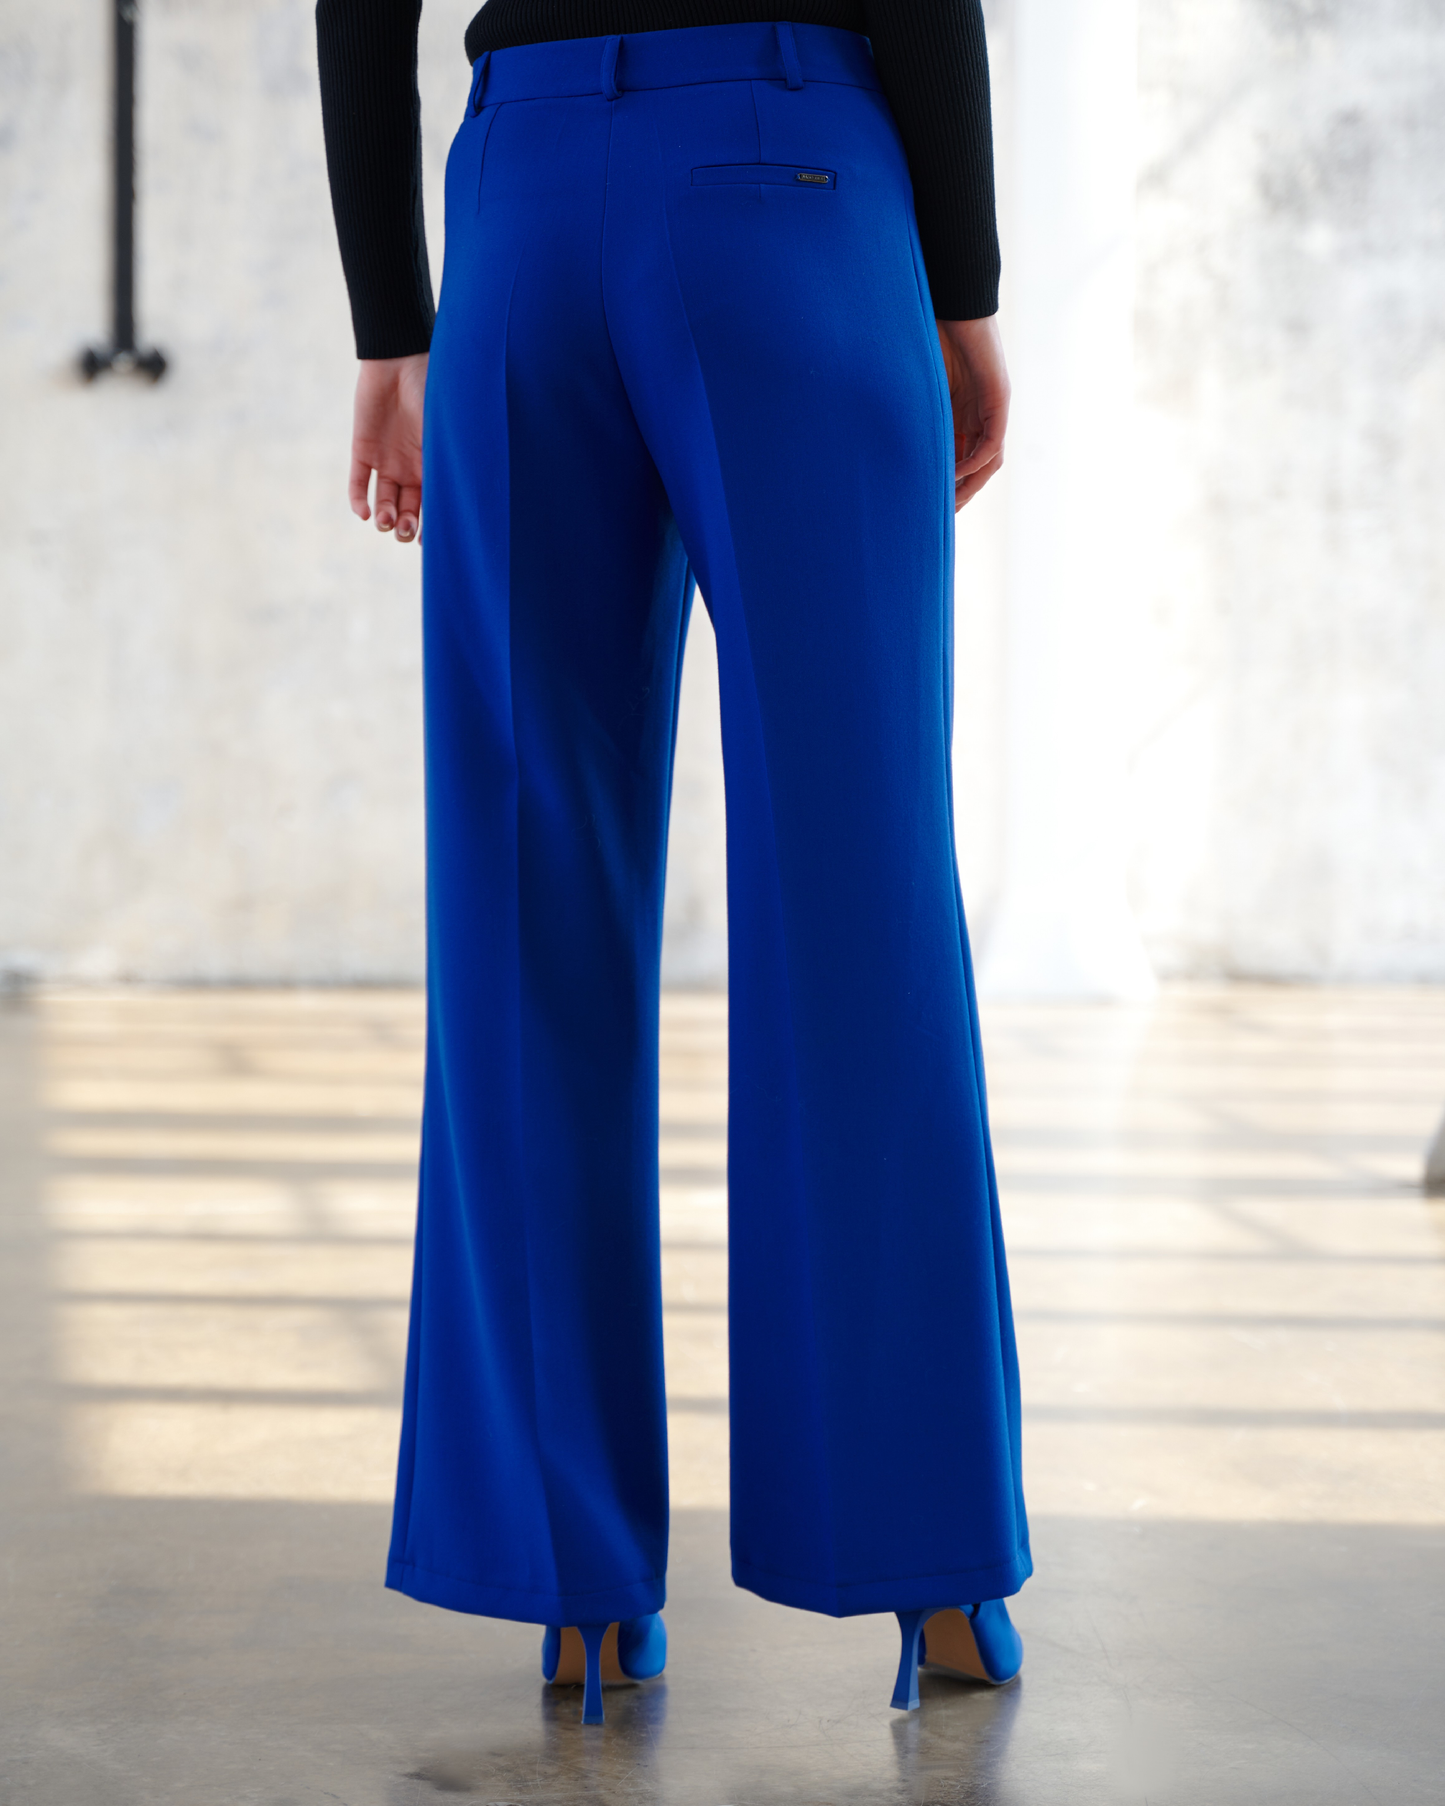 Orcan trousers